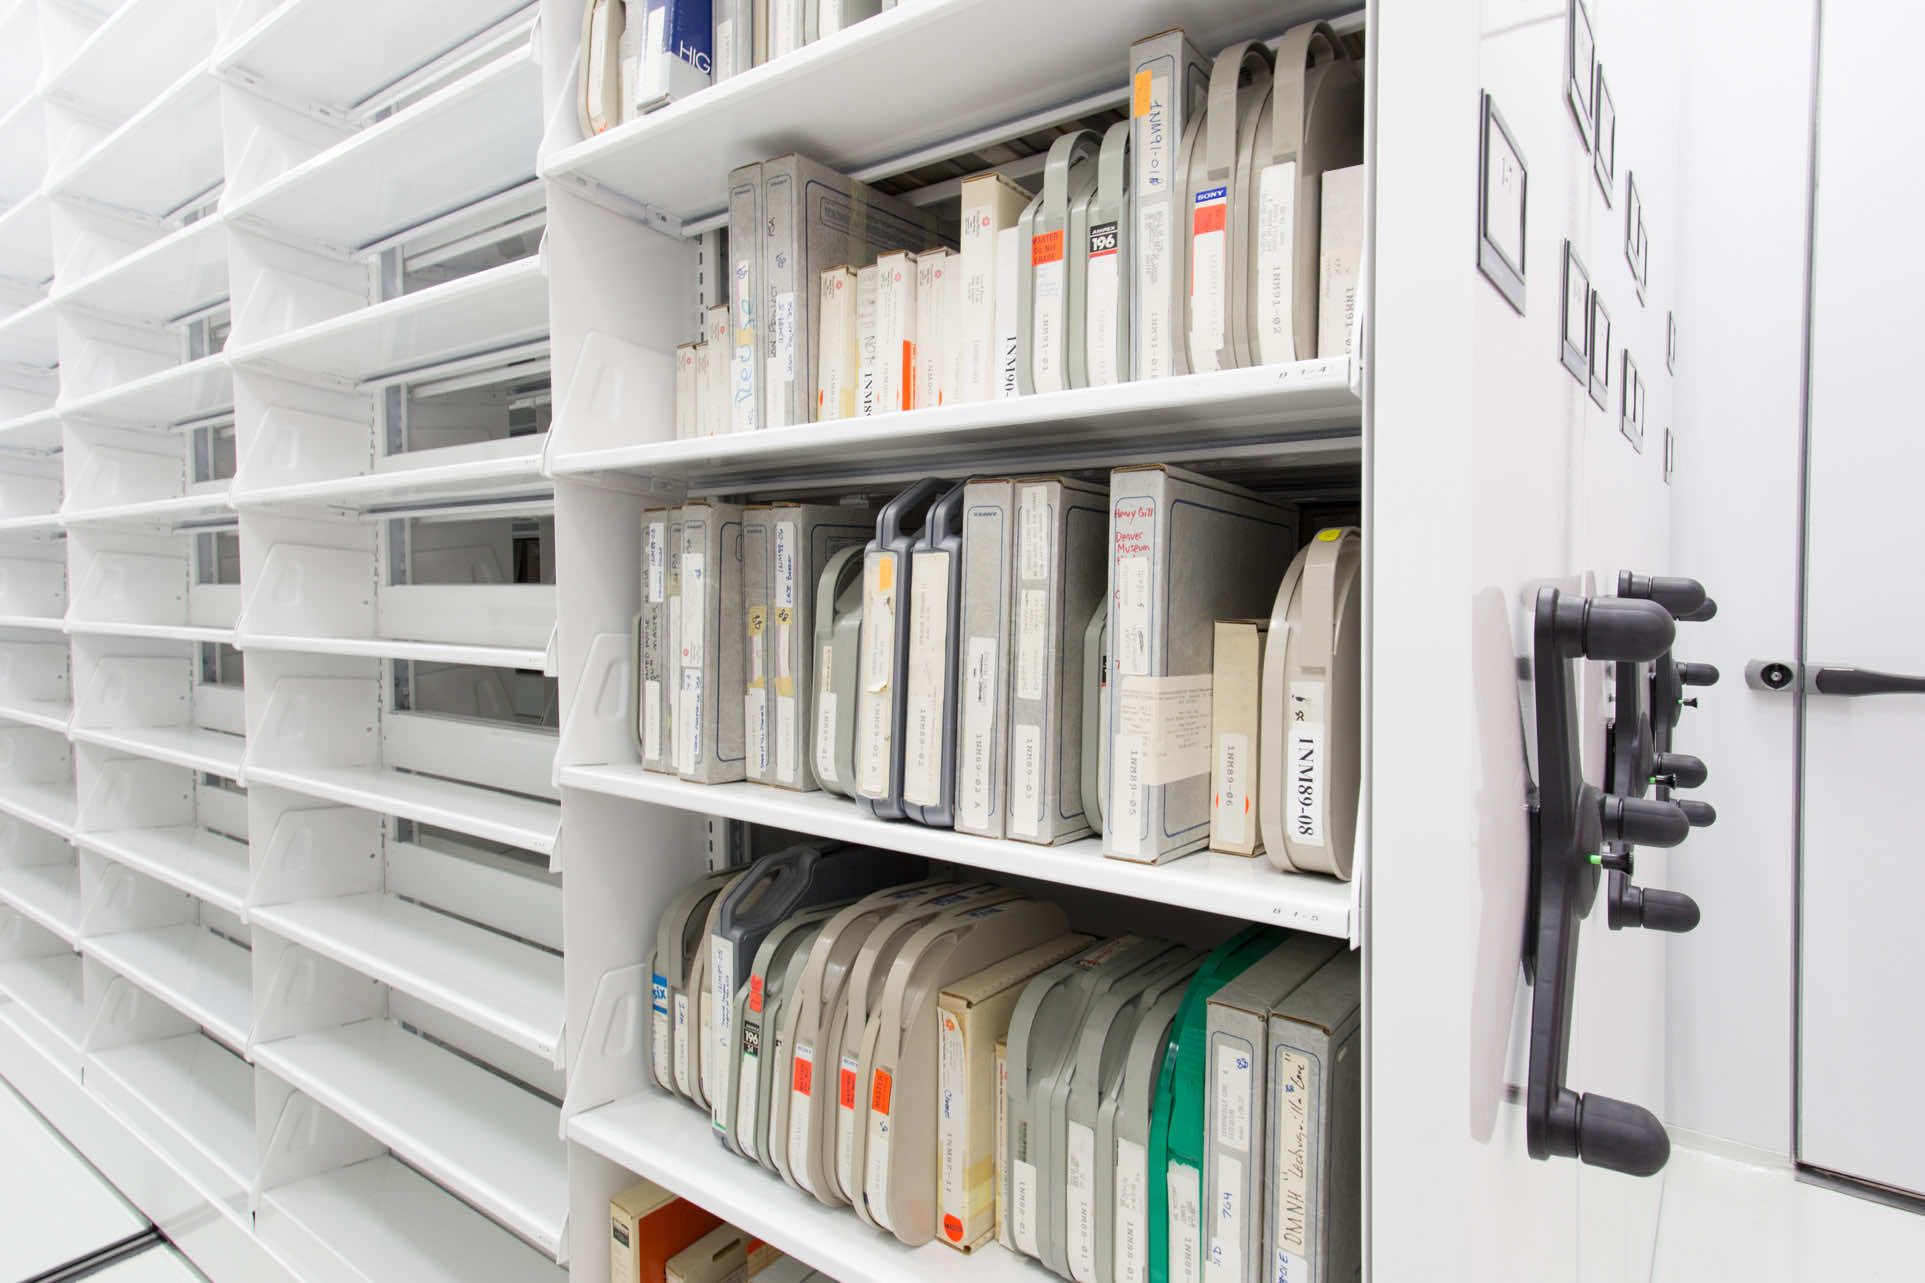 climate controlled cold storage film archive spacesaver compactor museum preservation